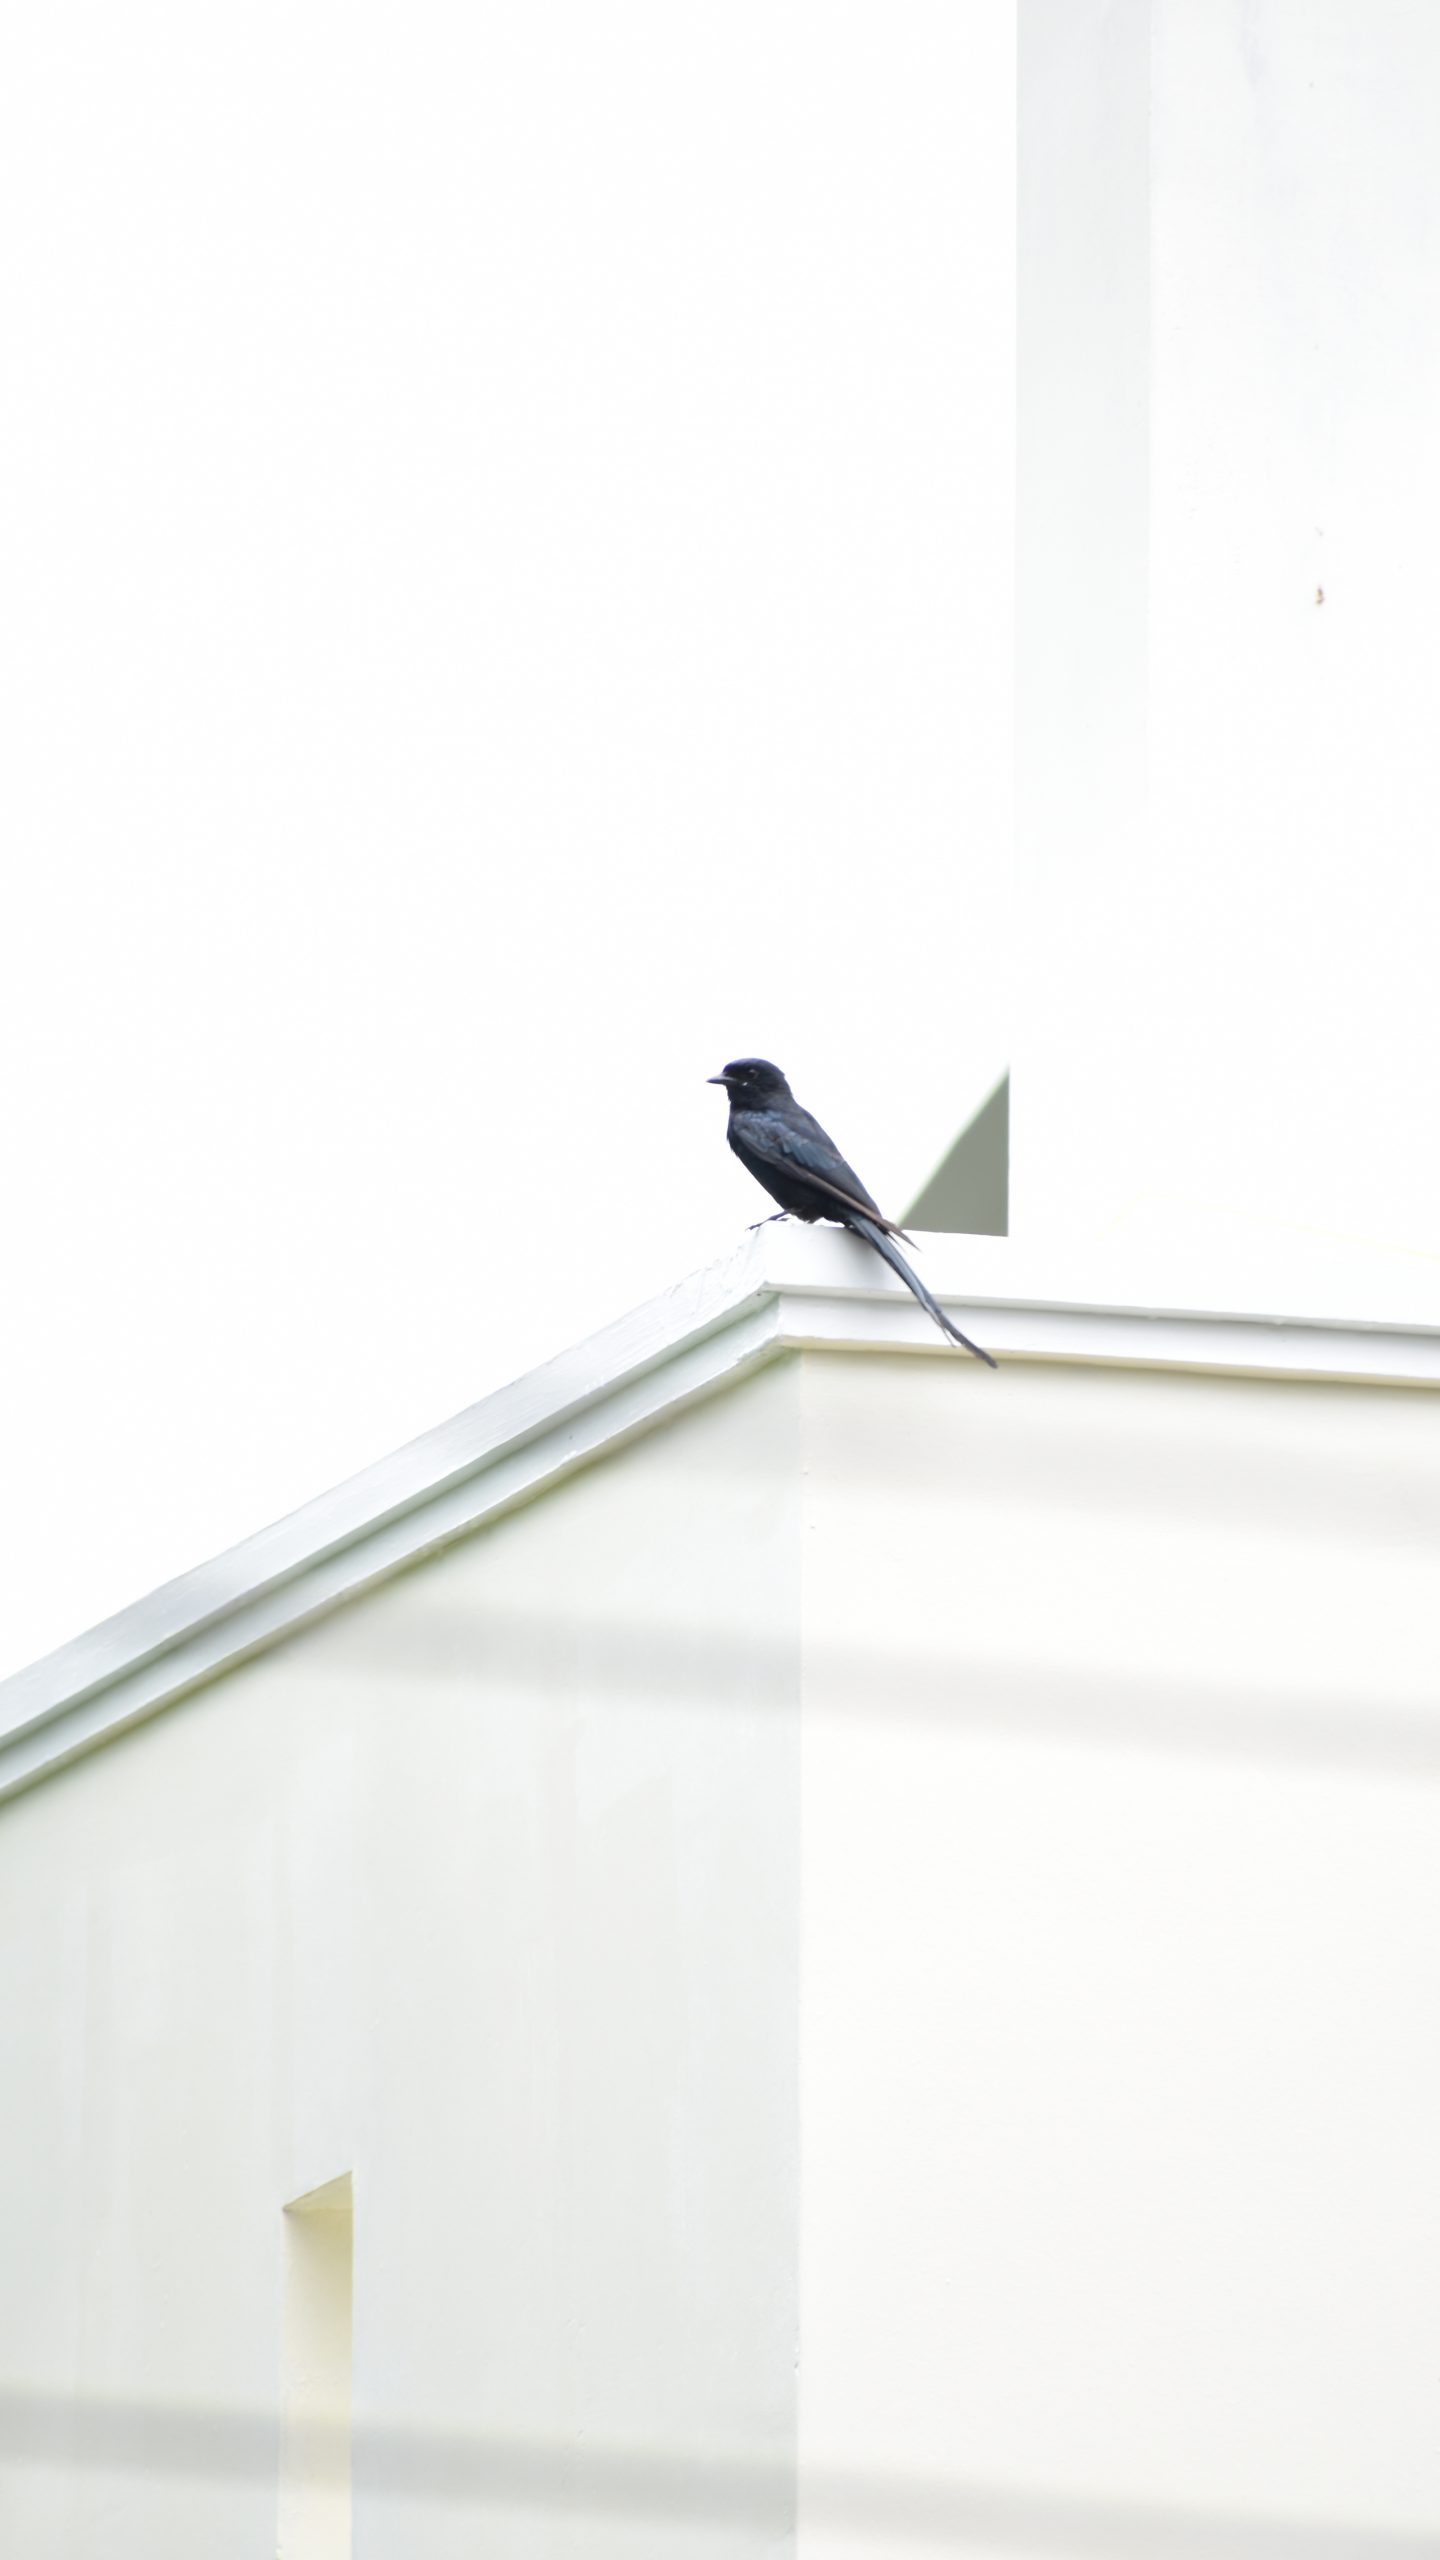 Black bird with long tail